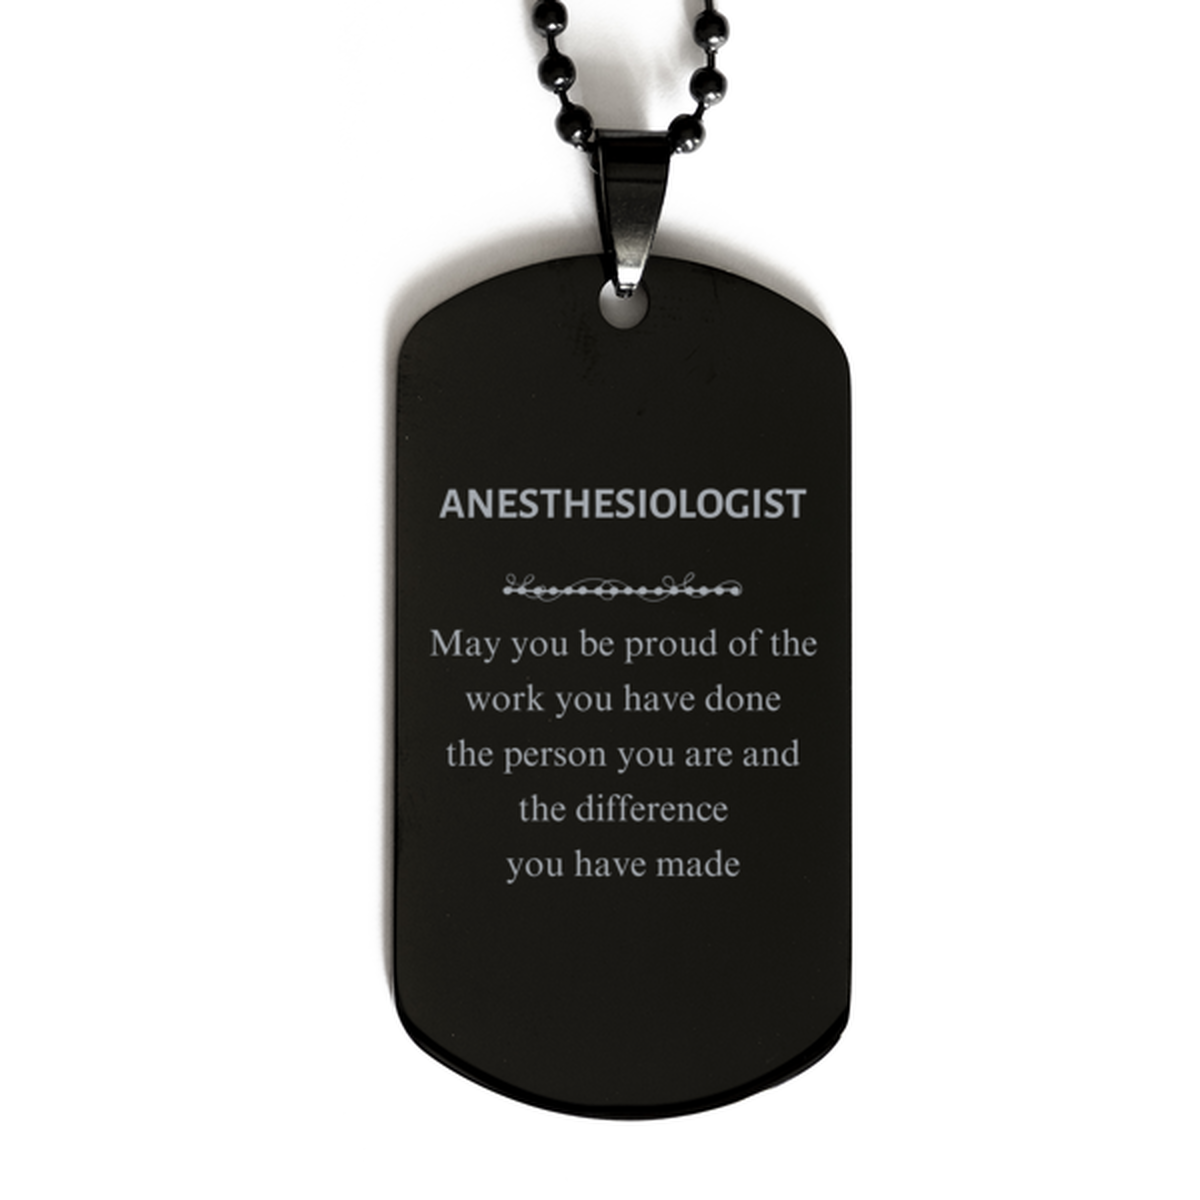 Anesthesiologist May you be proud of the work you have done, Retirement Anesthesiologist Black Dog Tag for Colleague Appreciation Gifts Amazing for Anesthesiologist